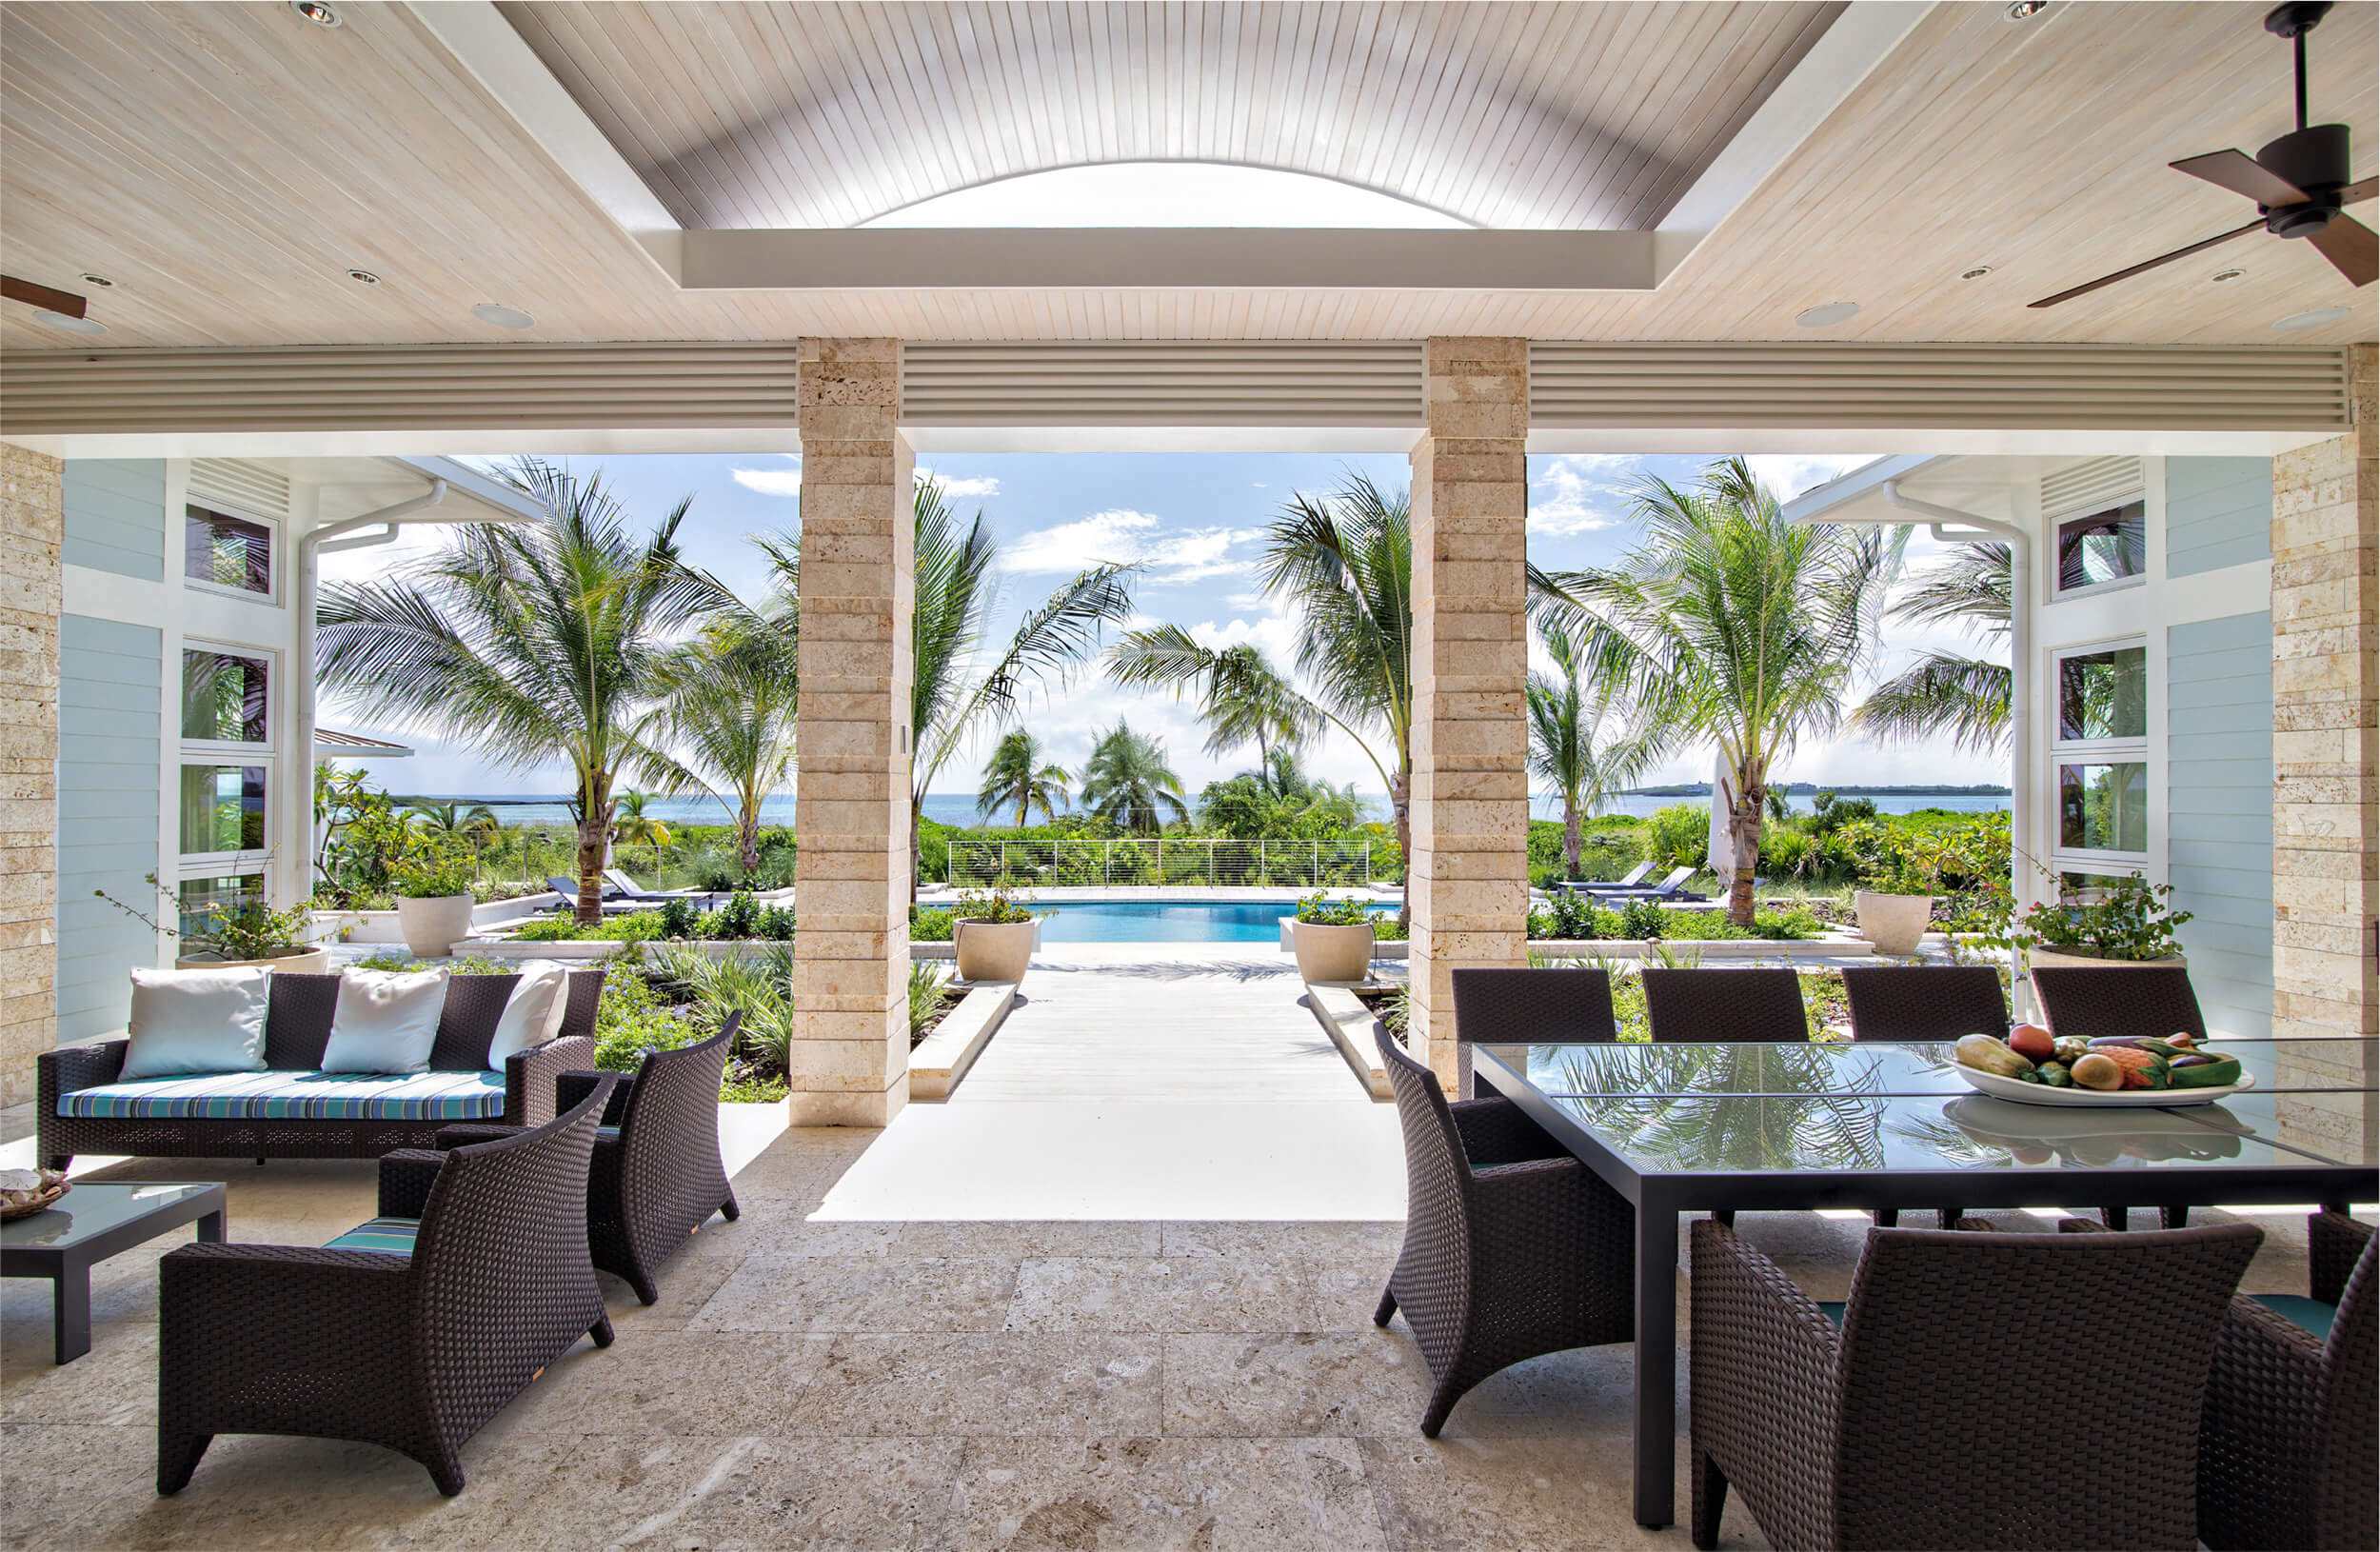 Sophisticated covered patio with modern wicker furniture at The Abaco Club, offering a blend of comfort and style for the ultimate club lifestyle in The Bahamas.